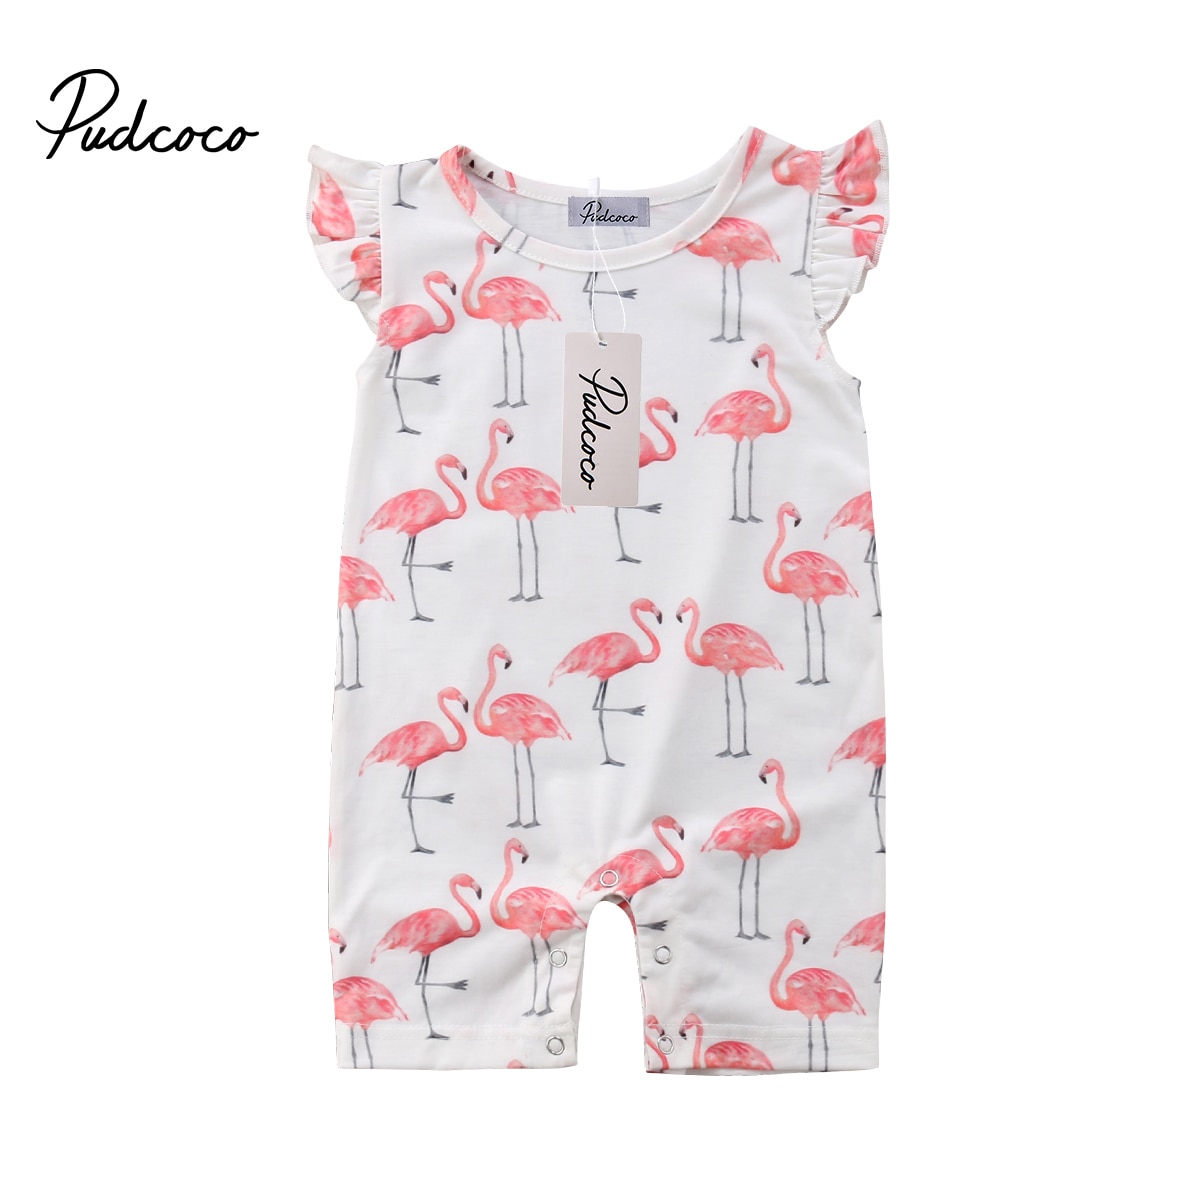 Cute Baby Rompers Toddler Kids Baby Girl Flamingo Jumpsuit Short Sleeve Romper Harem Trousers Jumper Girl Clothes Outfits